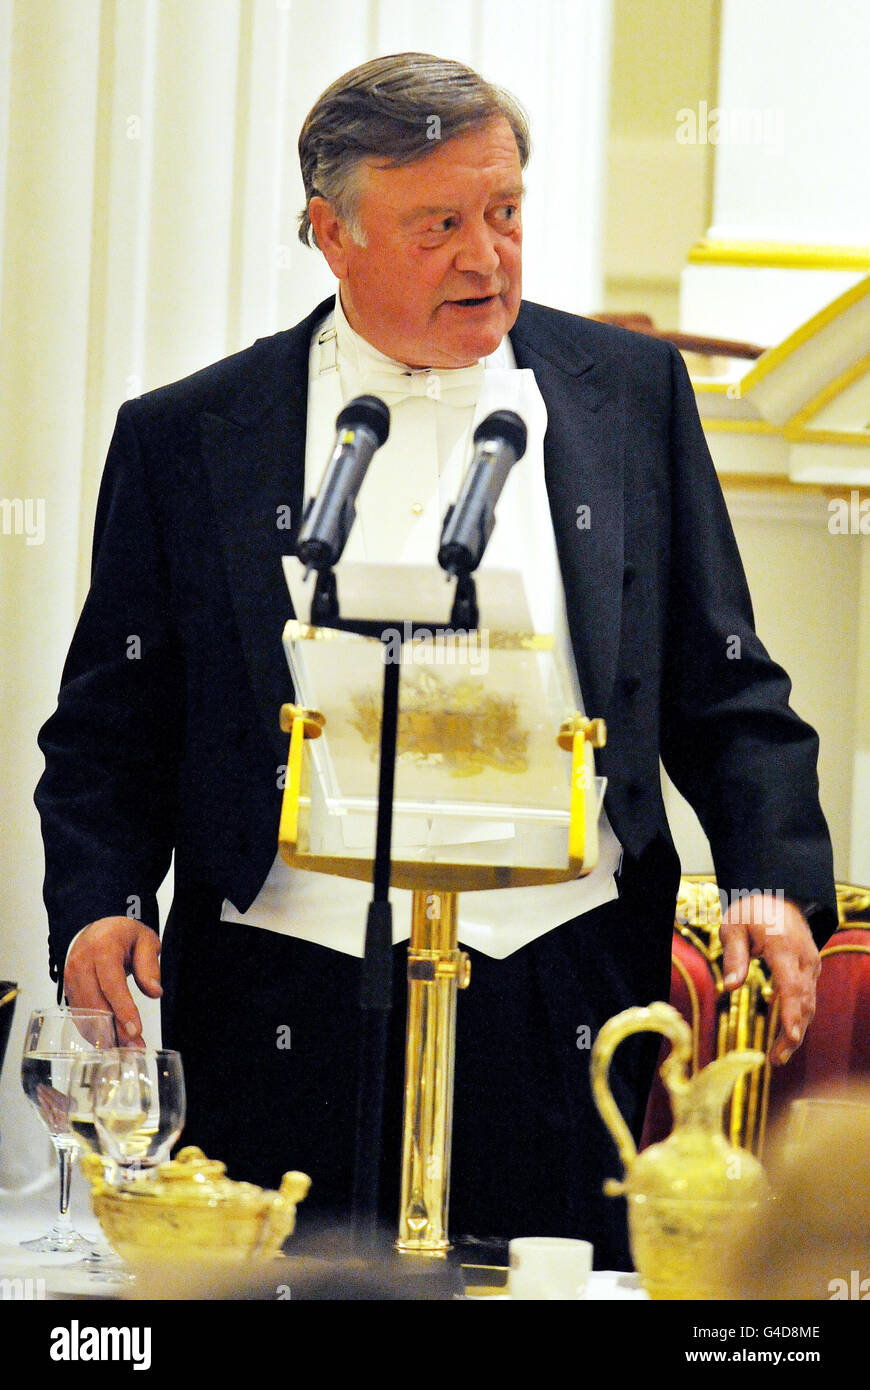 The Lord Chancellor and Secretary of State for Justice Kenneth Clarke delivers his after dinner address at the Mansion House in the City of London after the Lord Mayor of London Judges dinner. Stock Photo